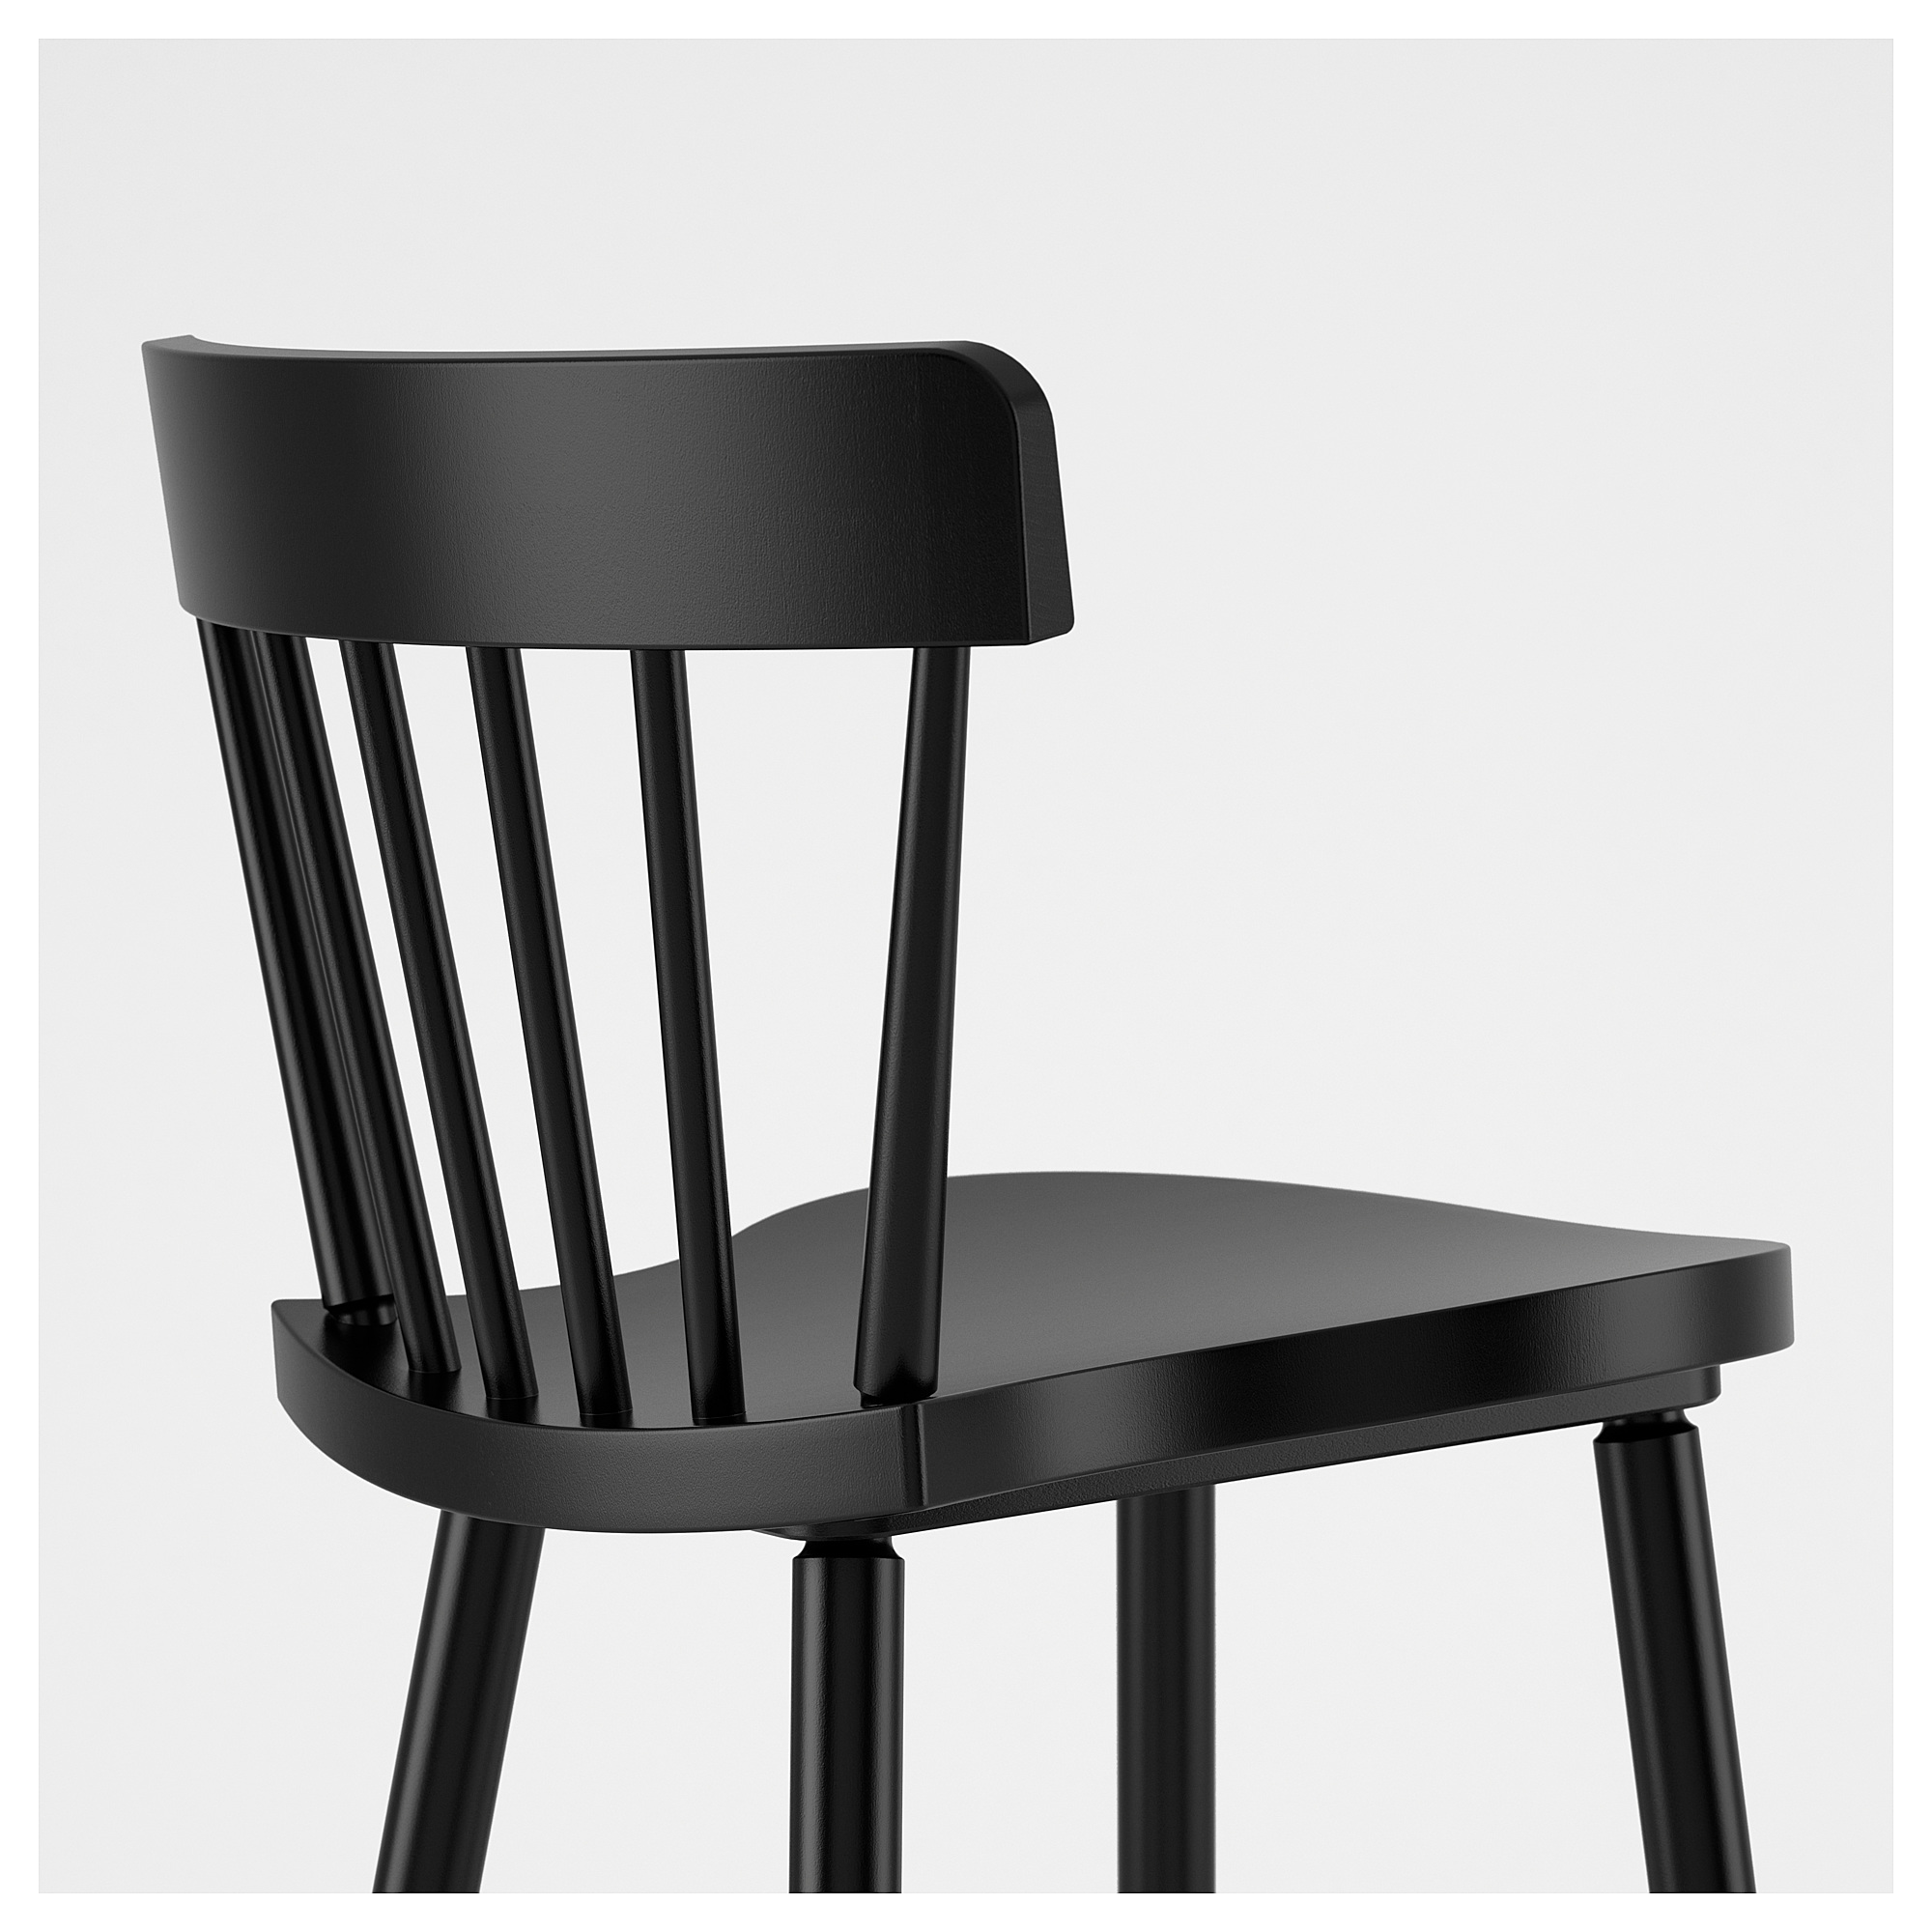 NORRARYD bar stool with backrest, seat height 74cm, black IKEA Hong Kong and Macau